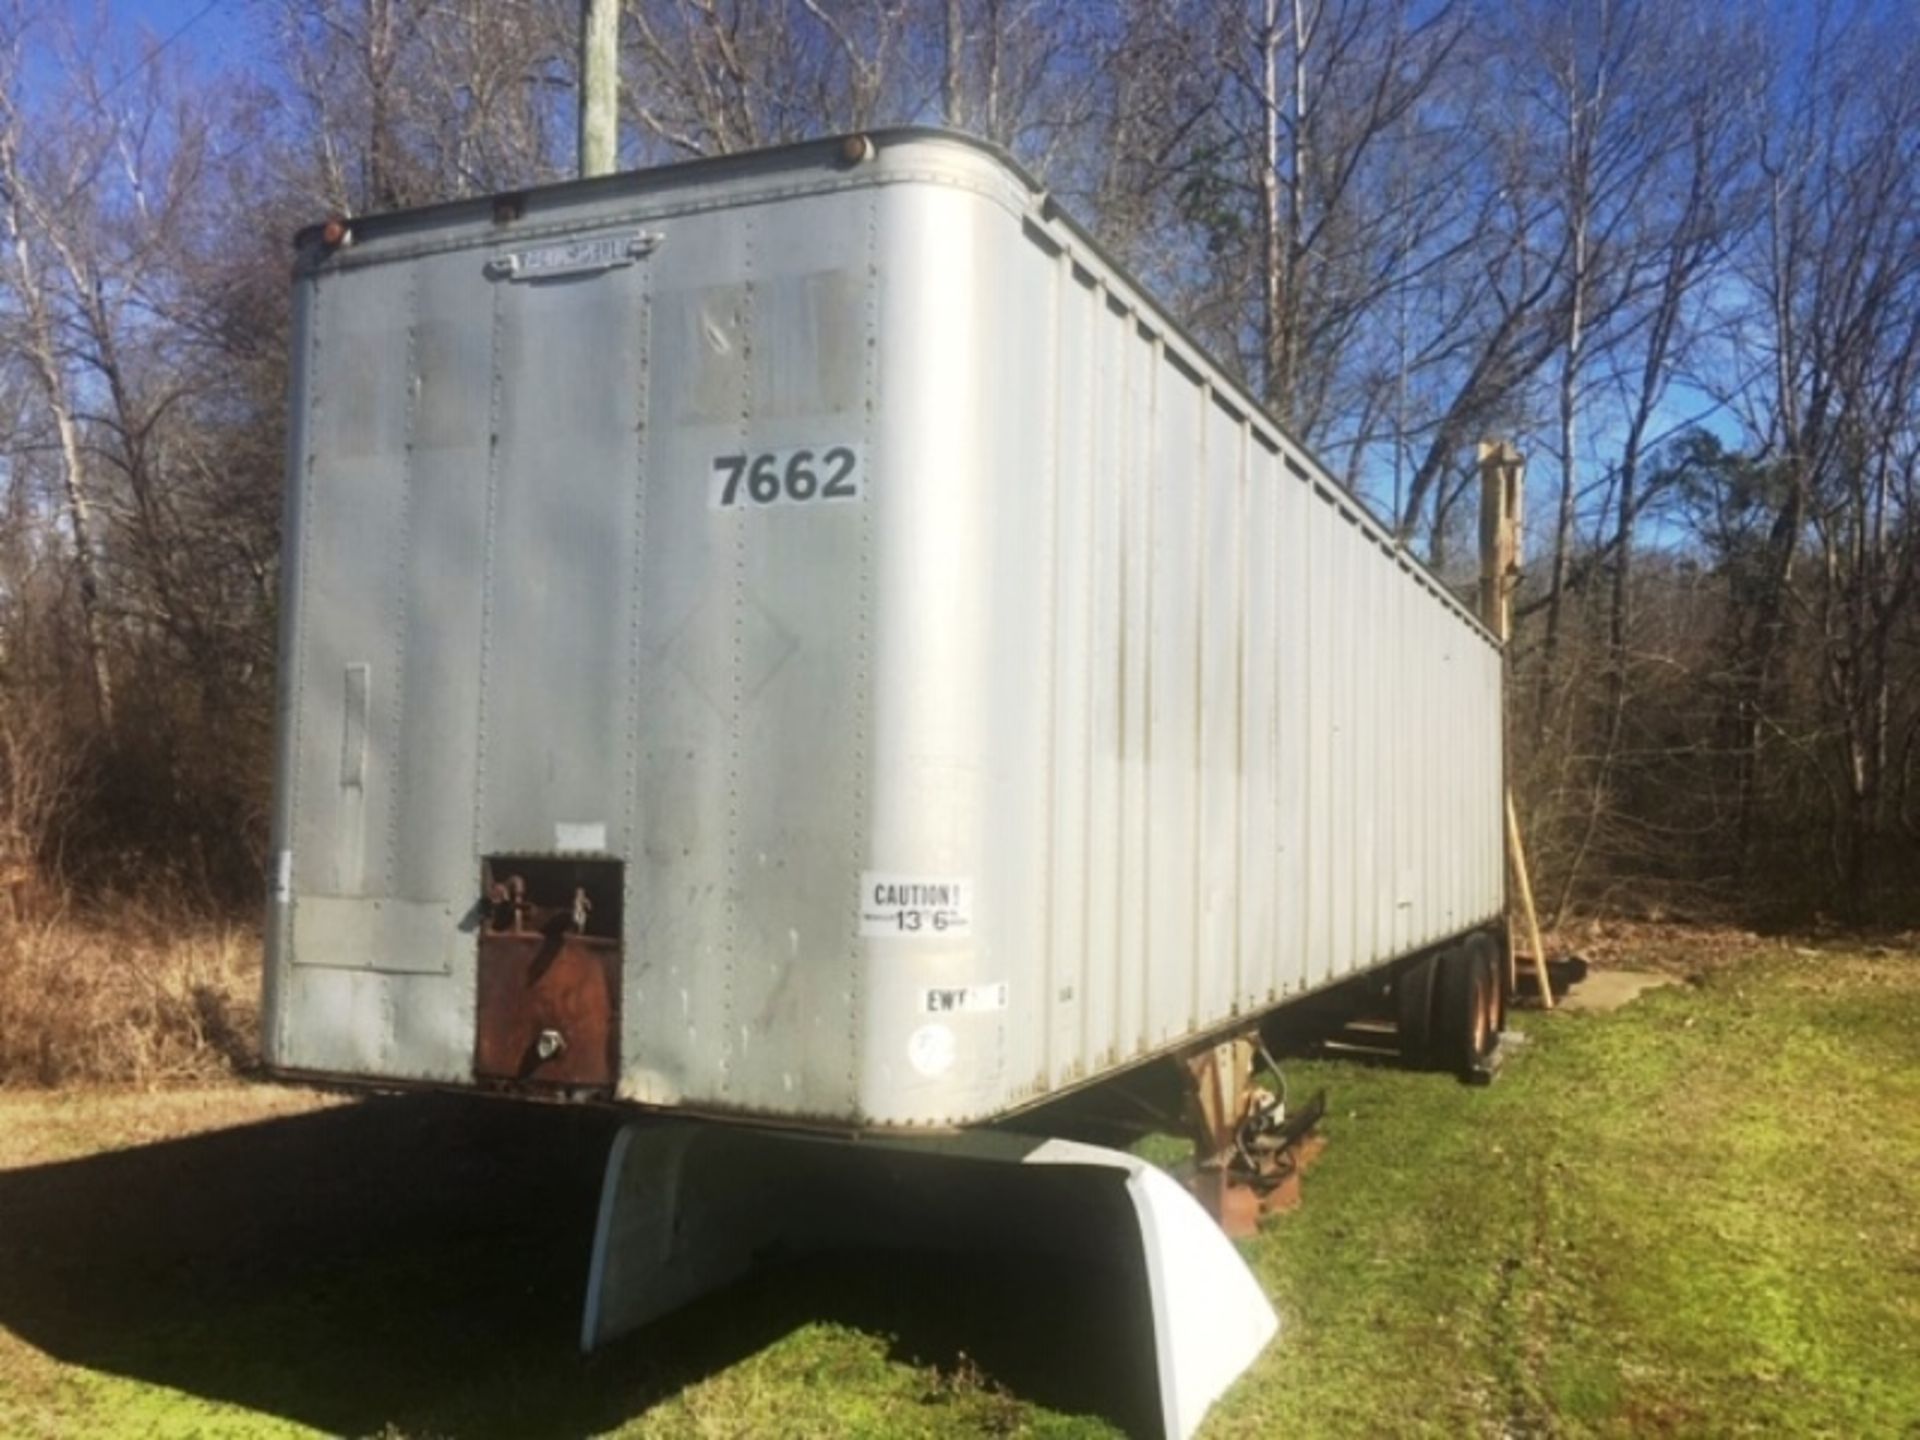 Trail Mobile Mdl. A31JBCA1 Storage Trailer, 44', no title, Mfg. 1970 (No Loading Fee - Norm Pavlish- - Image 3 of 4